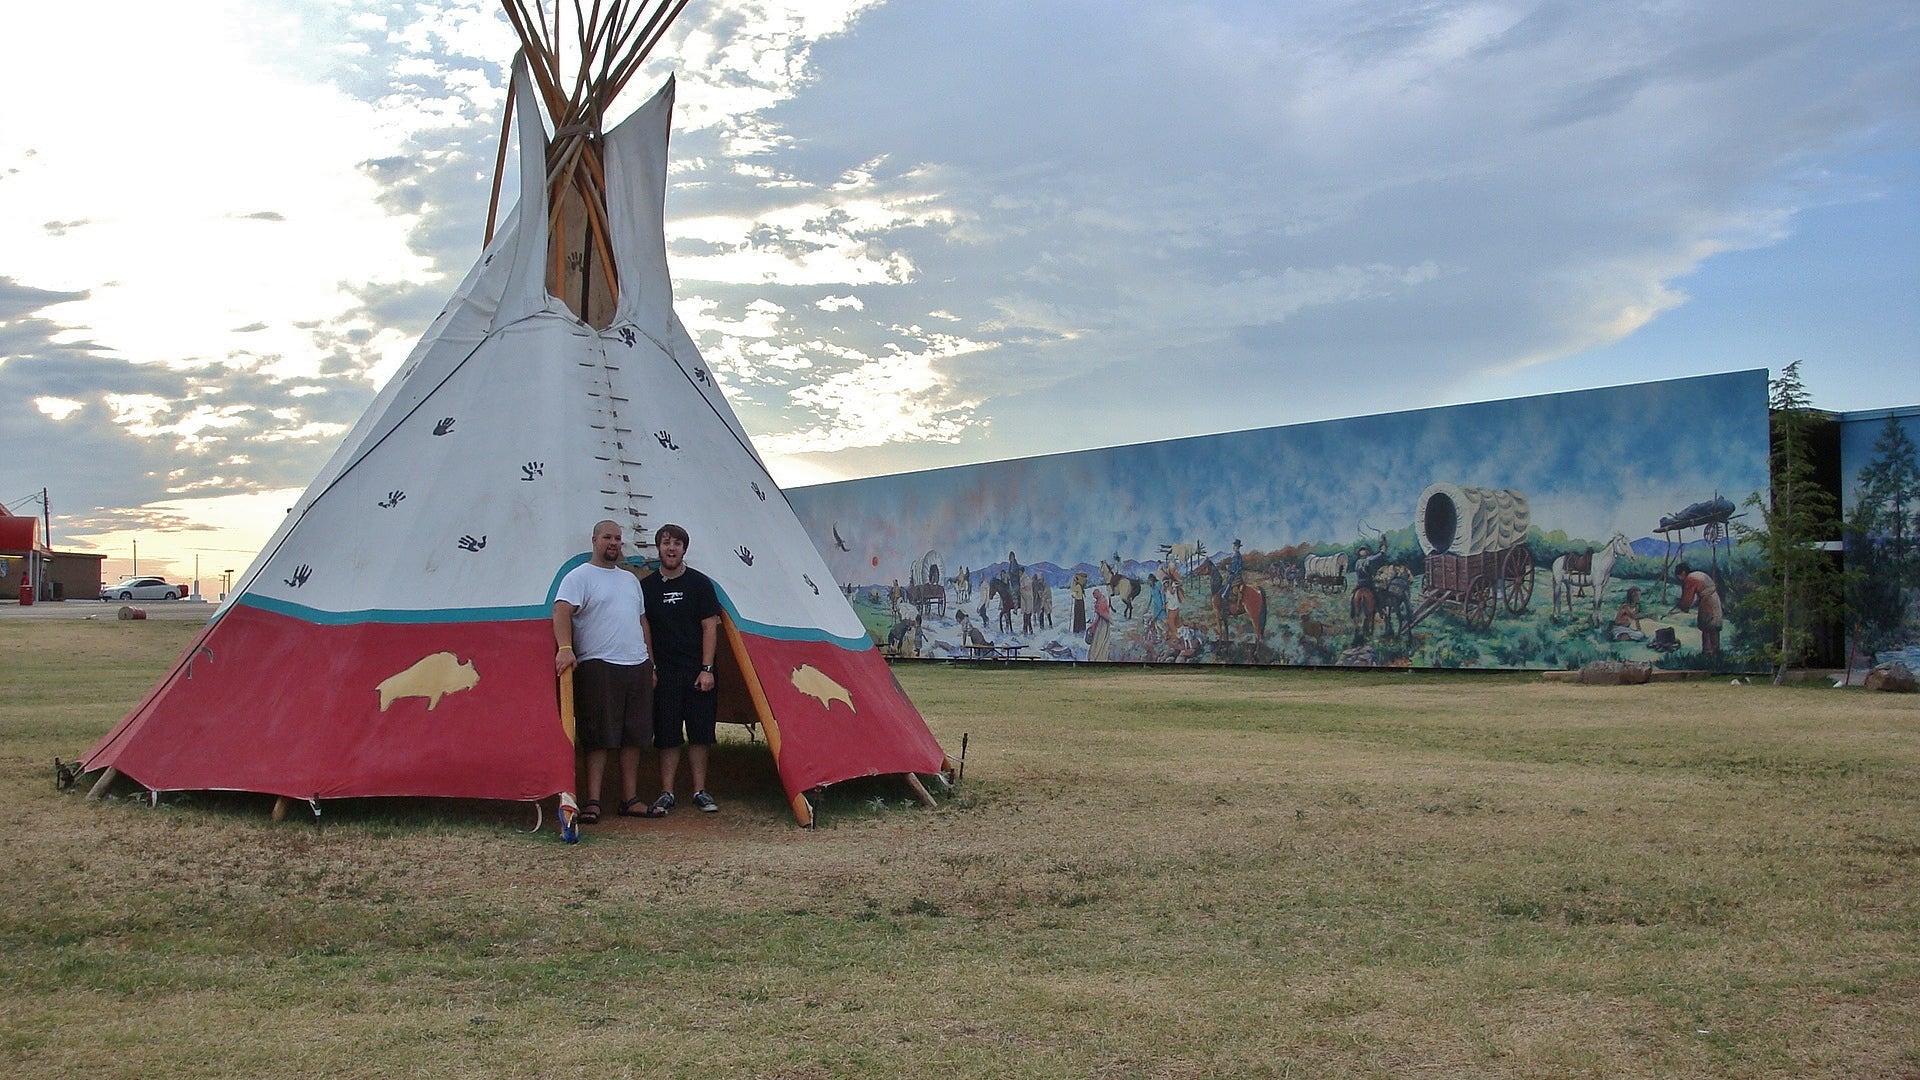 To add to the history of the area, there was a tee pee as well.